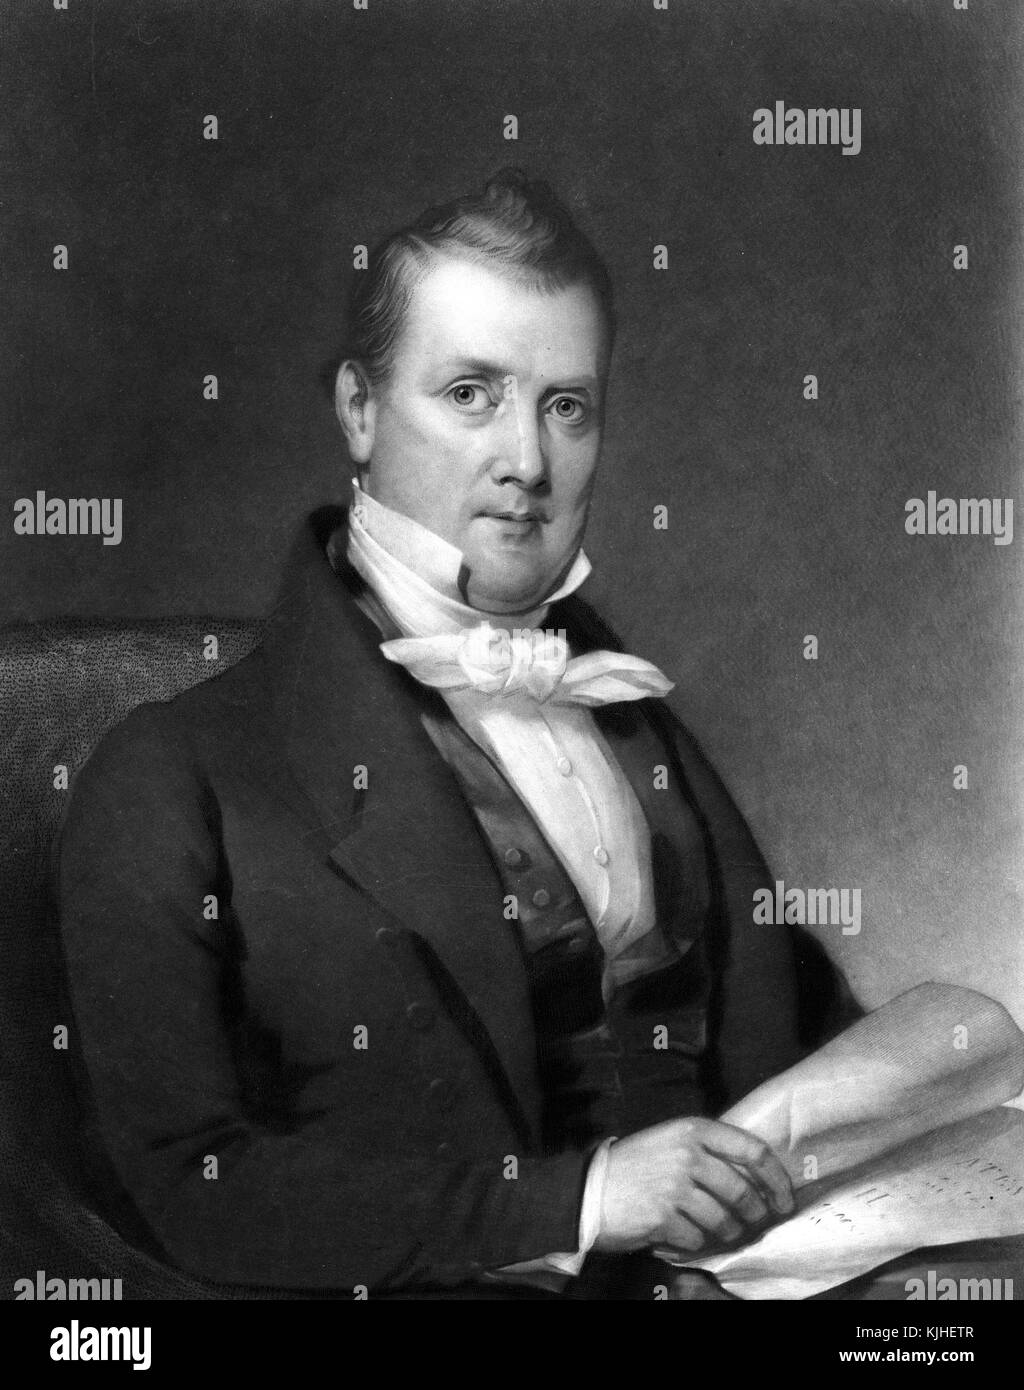 A portrait of a young James Buchanan, he was the 15th President of the United States, prior to becoming the president he served a long political career serving in both the United States House of Representatives and the United States Senate, he also as the ambassador to both Russia and the United Kingdom, he was the 17th United States Secretary of State, he is regarded as one of the worst Presidents of the United States because of his inability to prevent the secession of the south states, United Kingdom, 1870. From the New York Public Library. Stock Photo